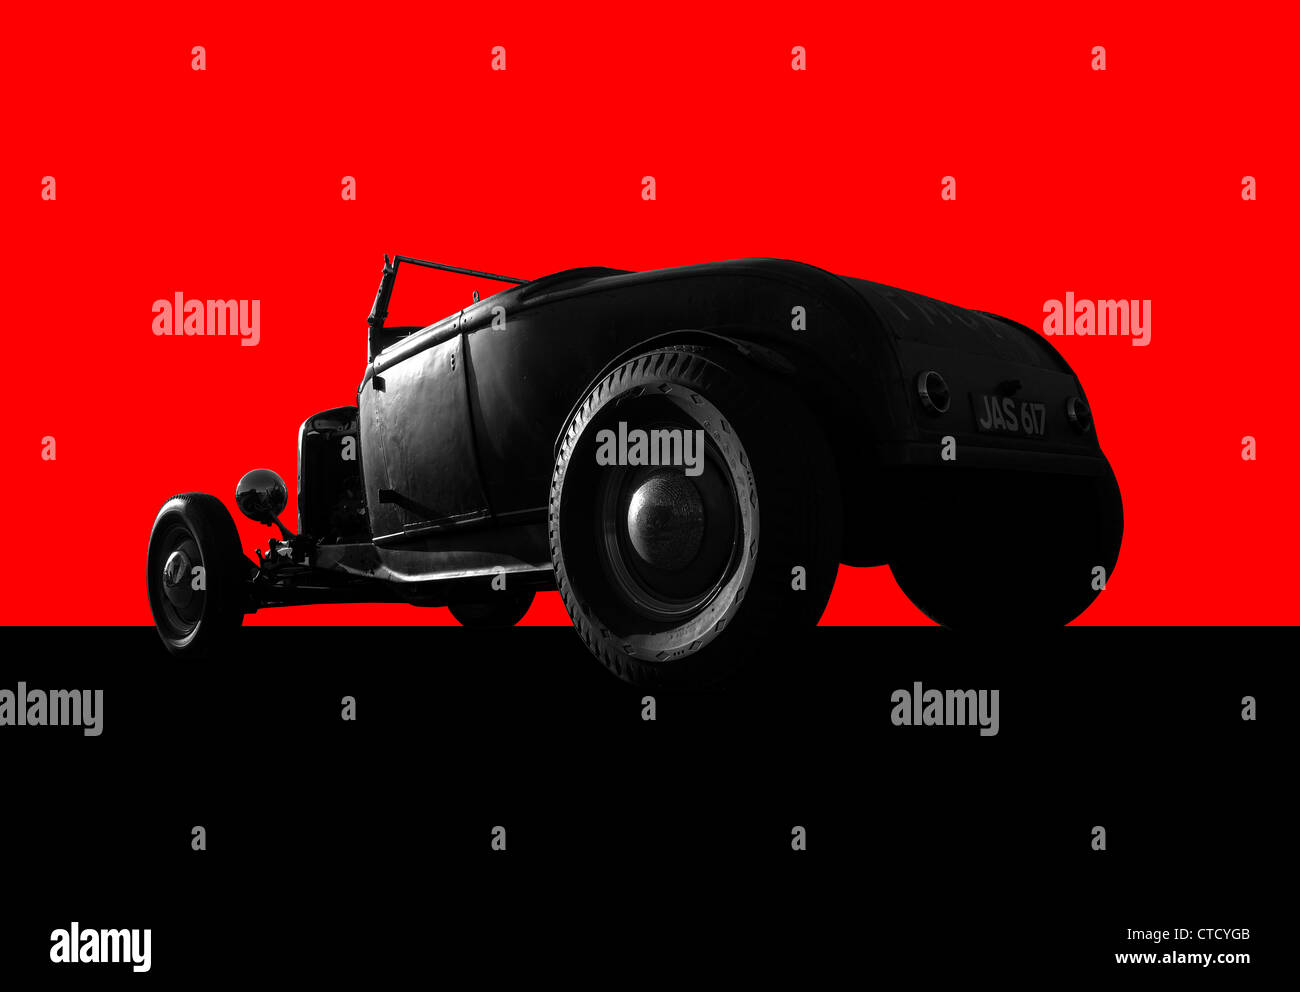 Cut-out image of hot rod car on red background Stock Photo